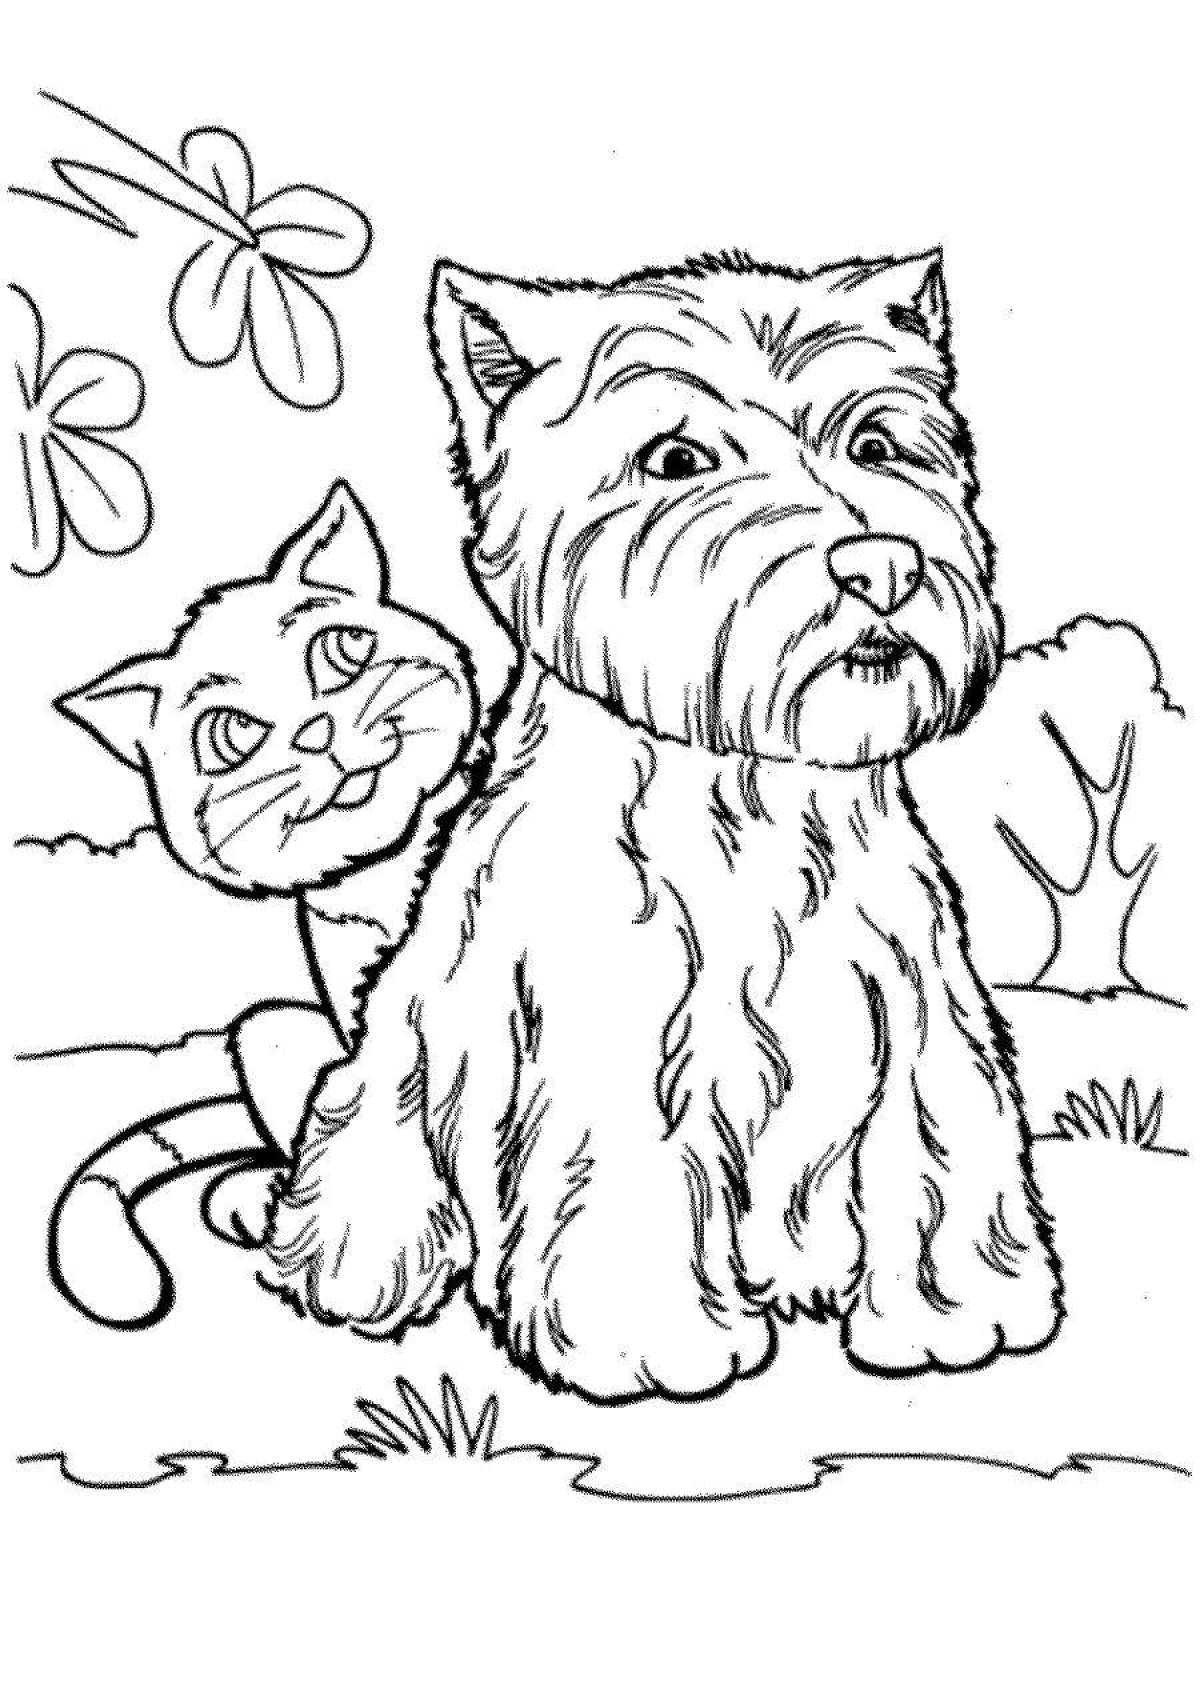 Fancy kitten and dog coloring page